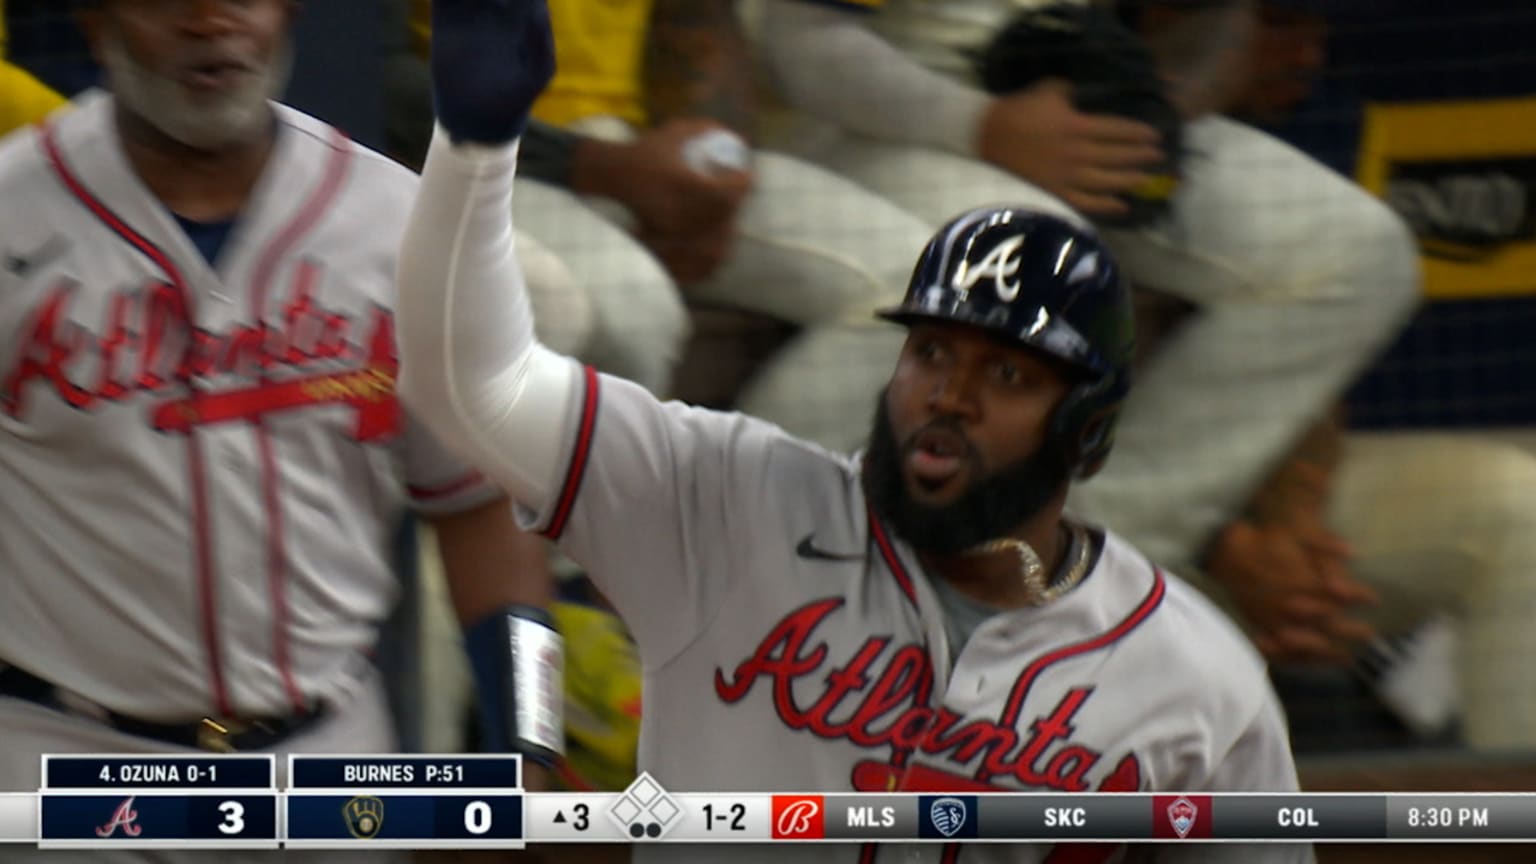 Ozuna, Acuña hit homers to back Strider's 10 strikeouts as Braves